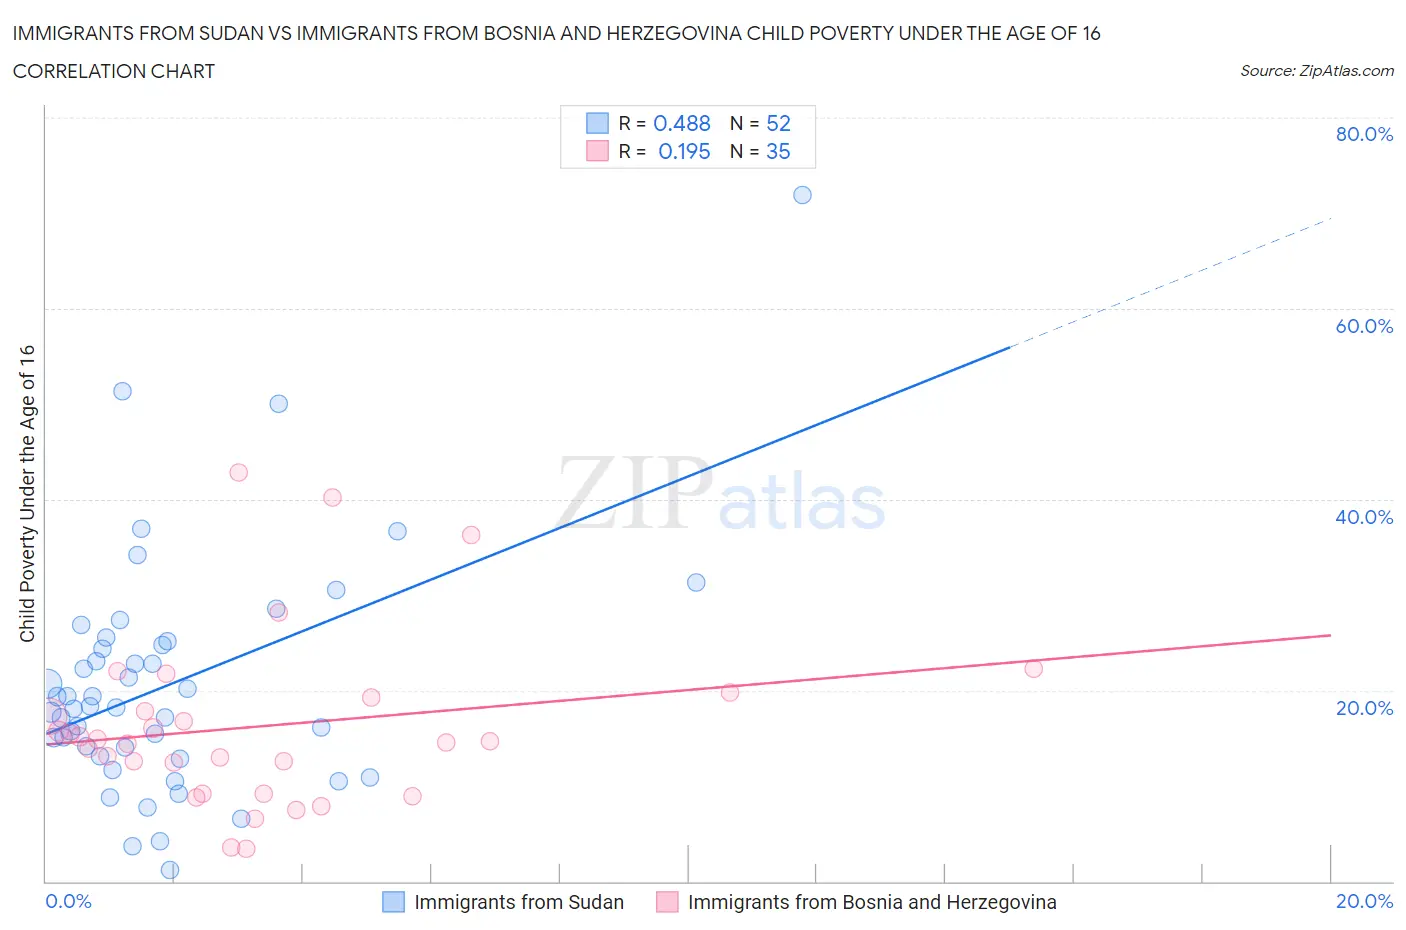 Immigrants from Sudan vs Immigrants from Bosnia and Herzegovina Child Poverty Under the Age of 16